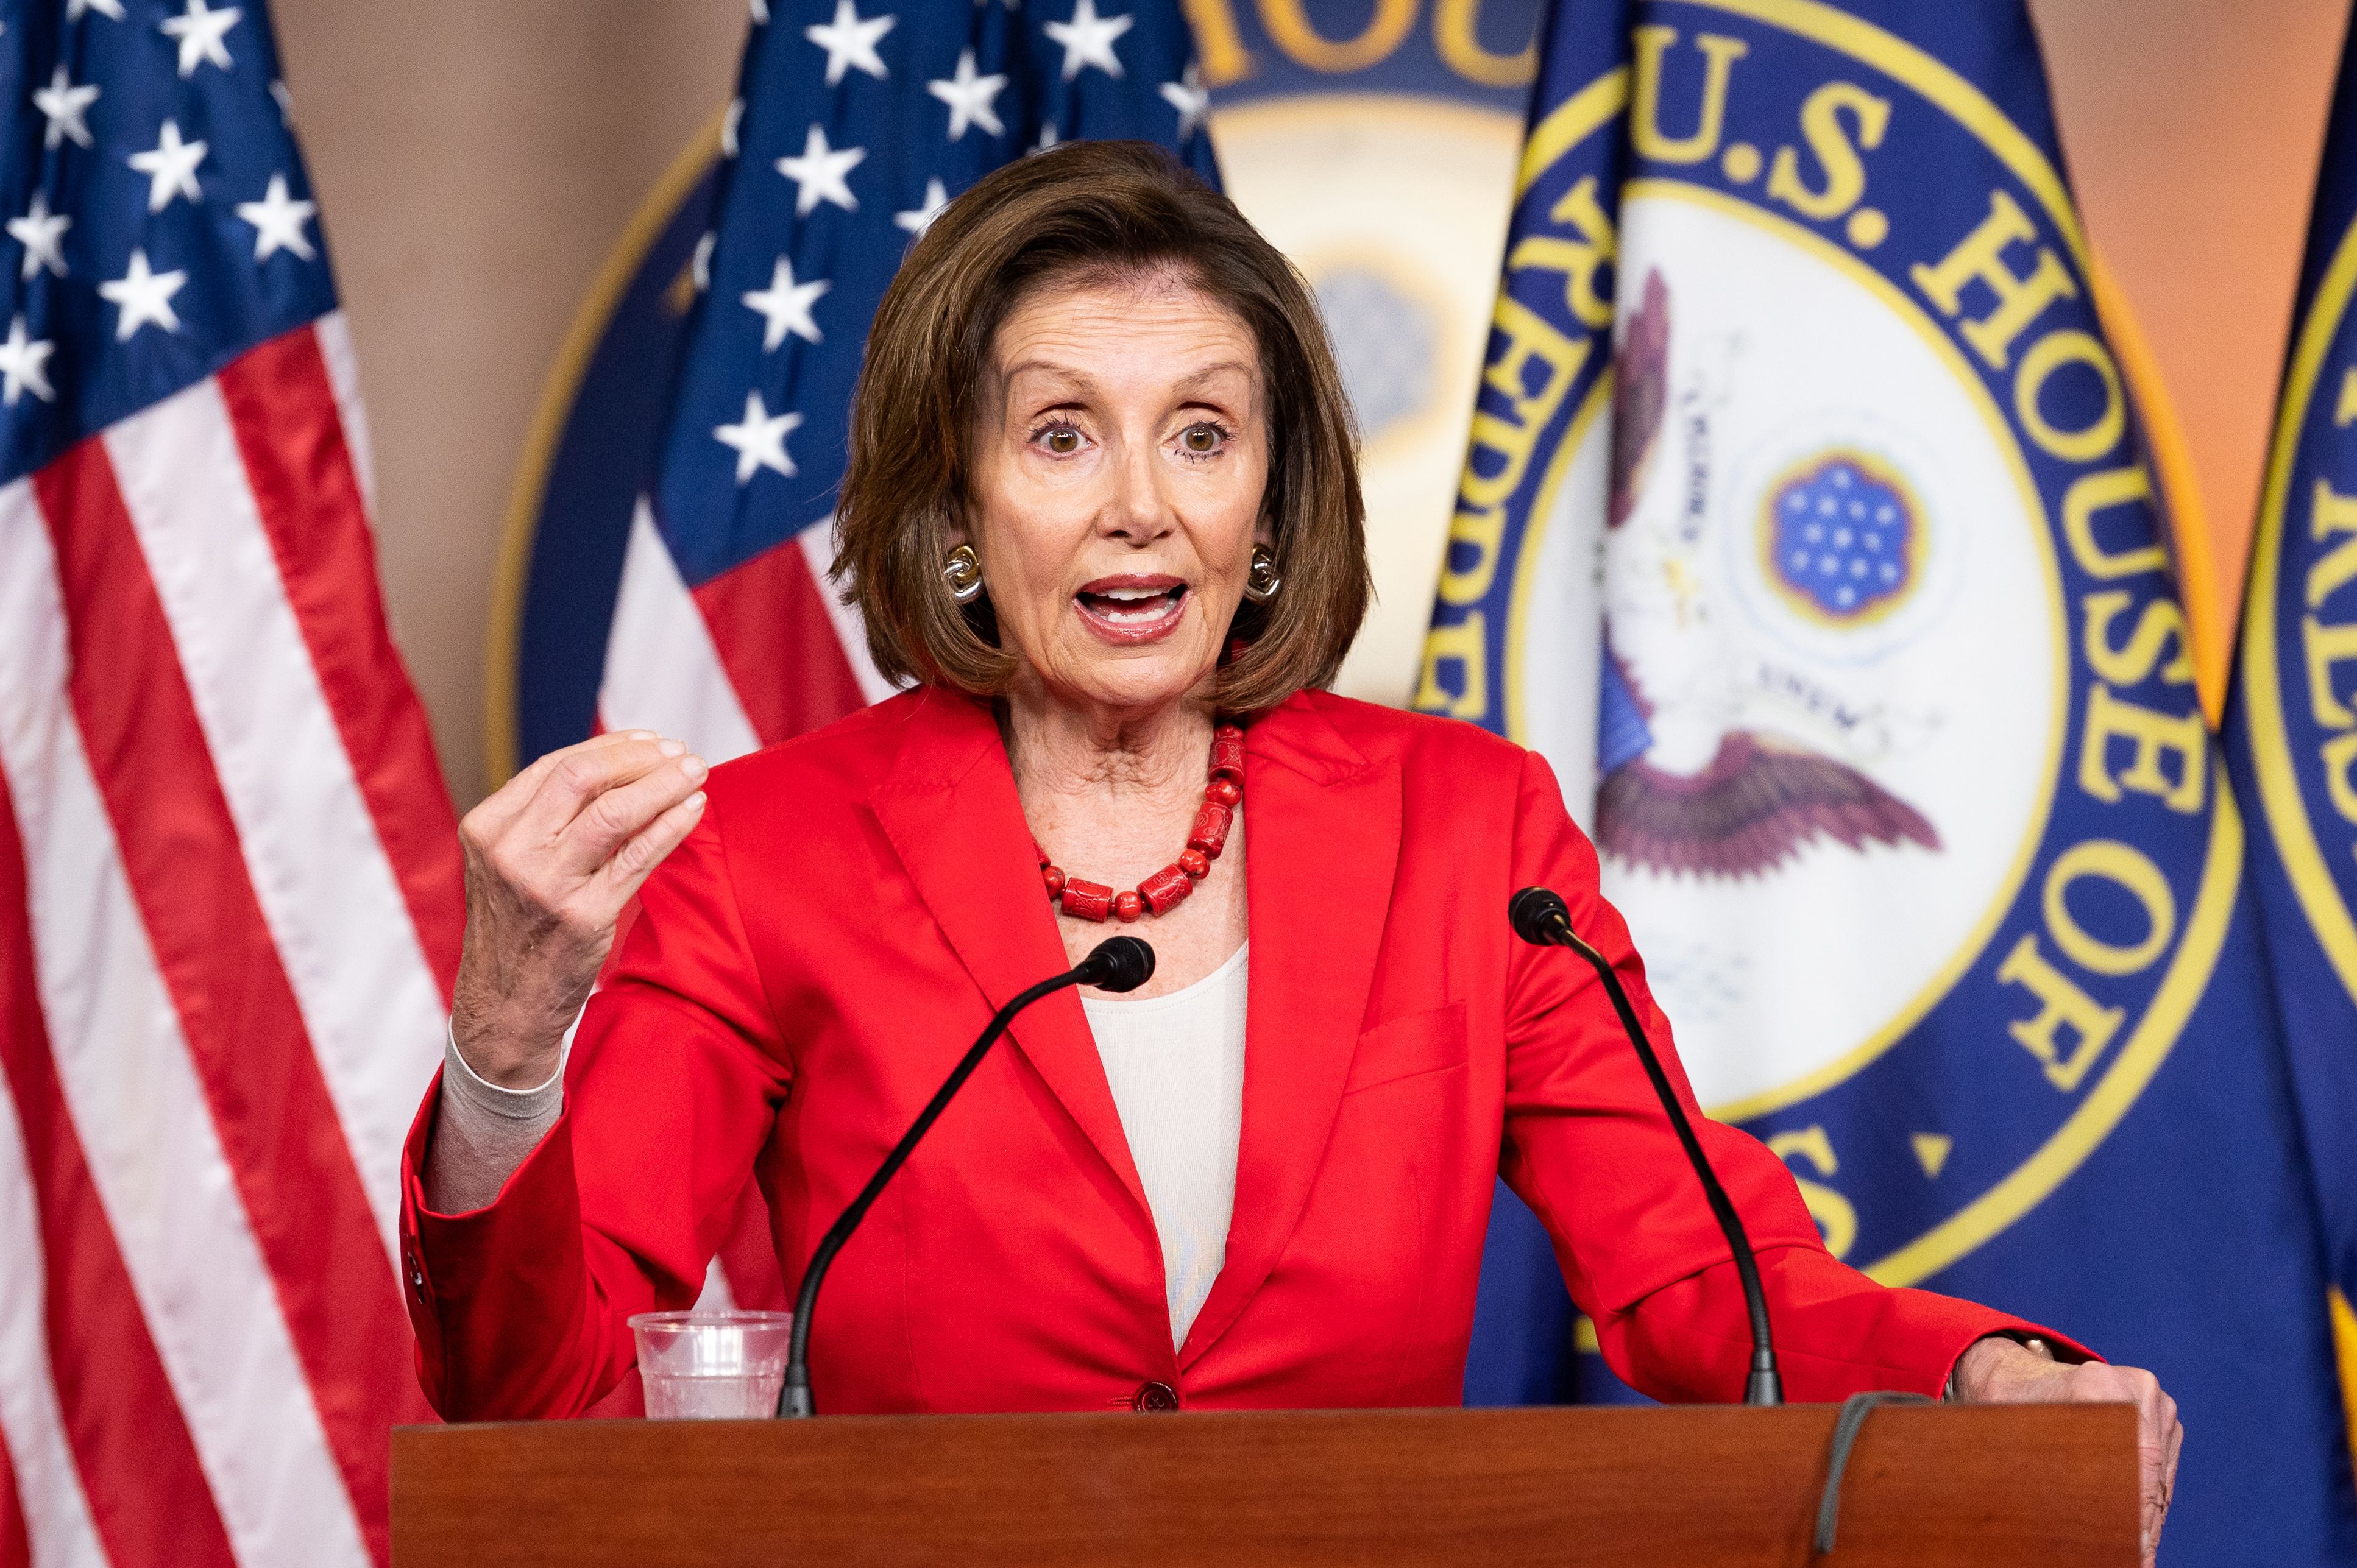 Pelosi's latest Medicare proposal would pass drug discounts to all consumers